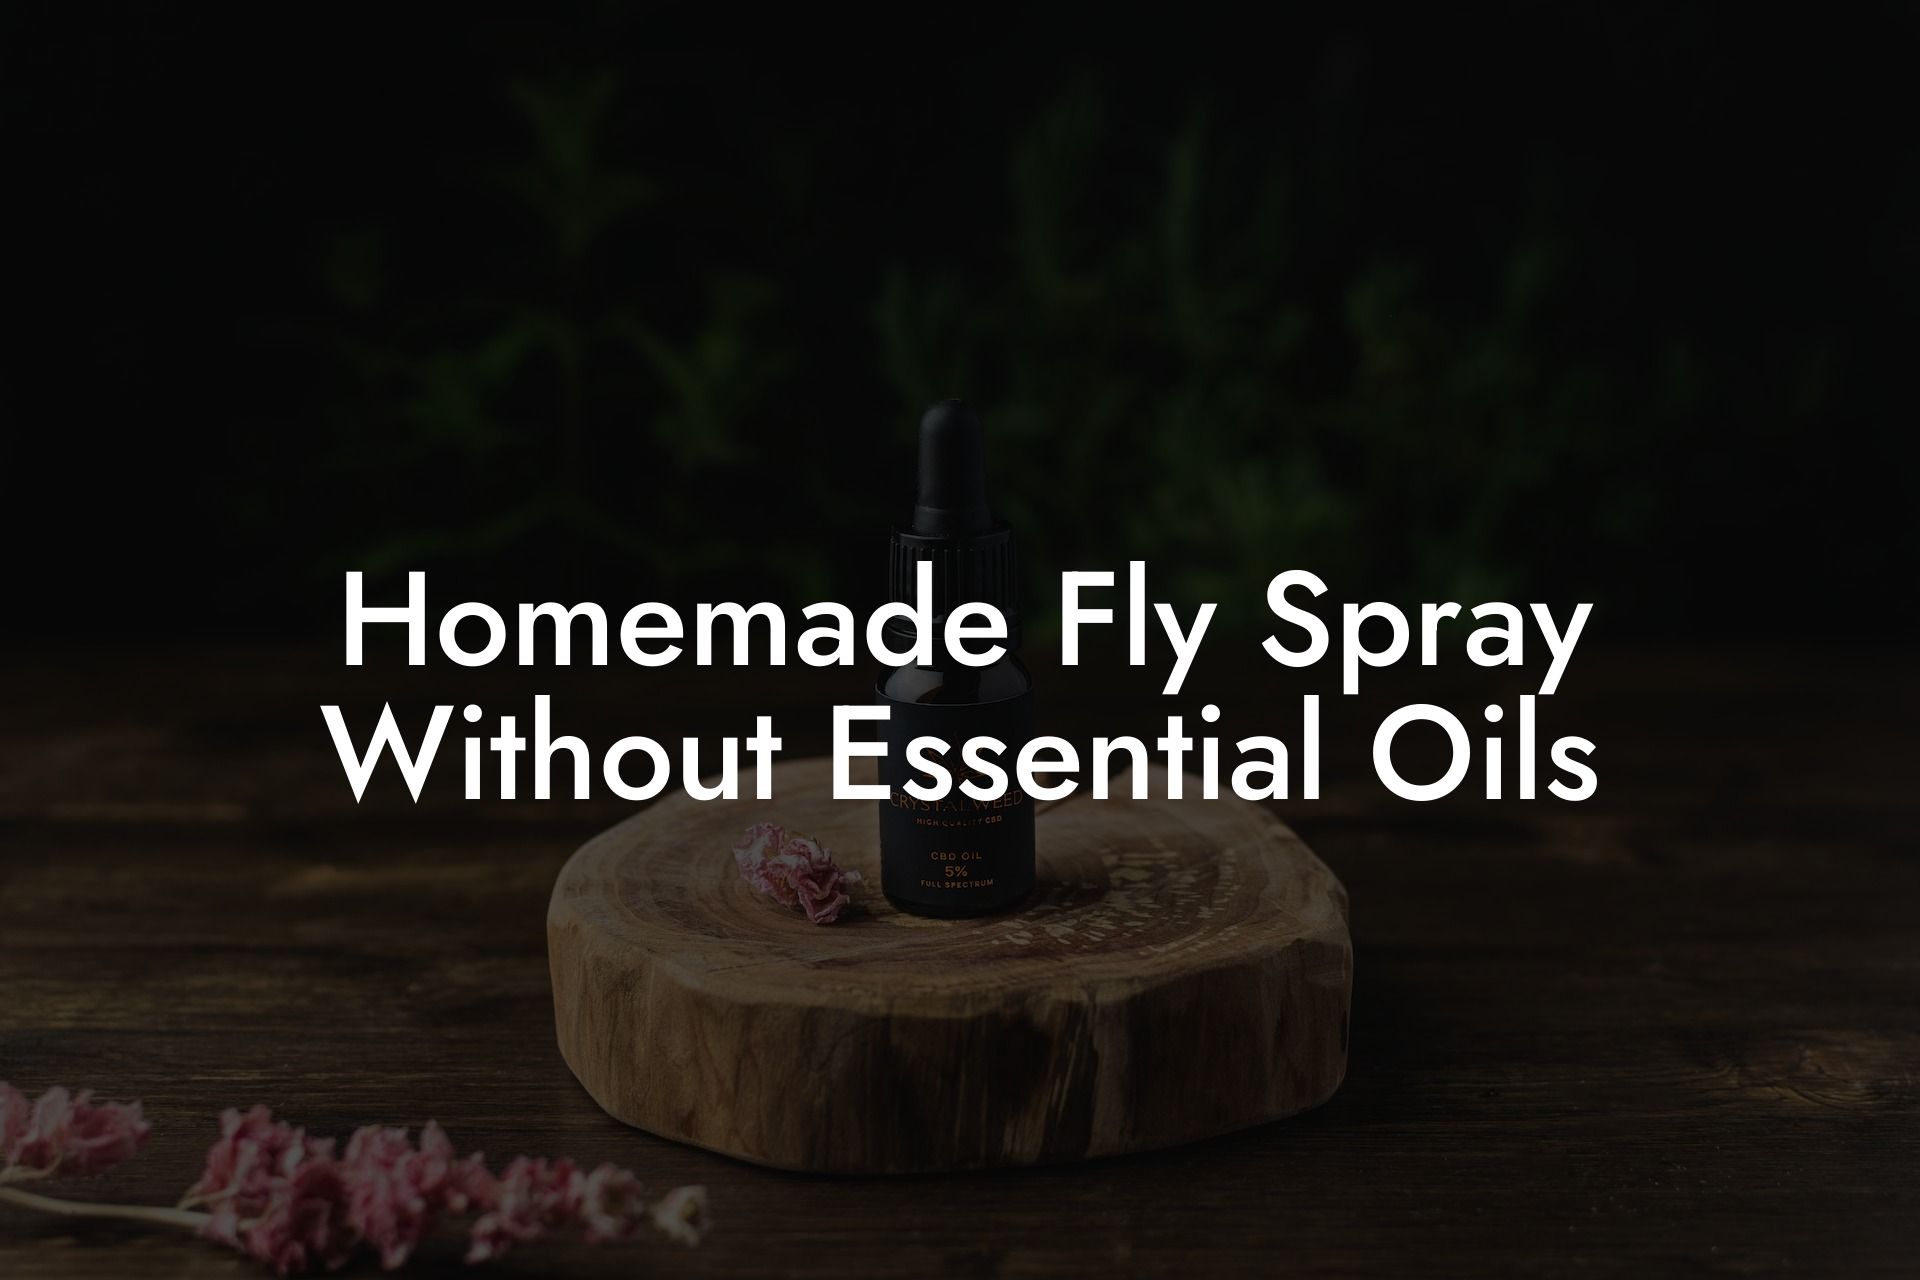 Homemade Fly Spray Without Essential Oils